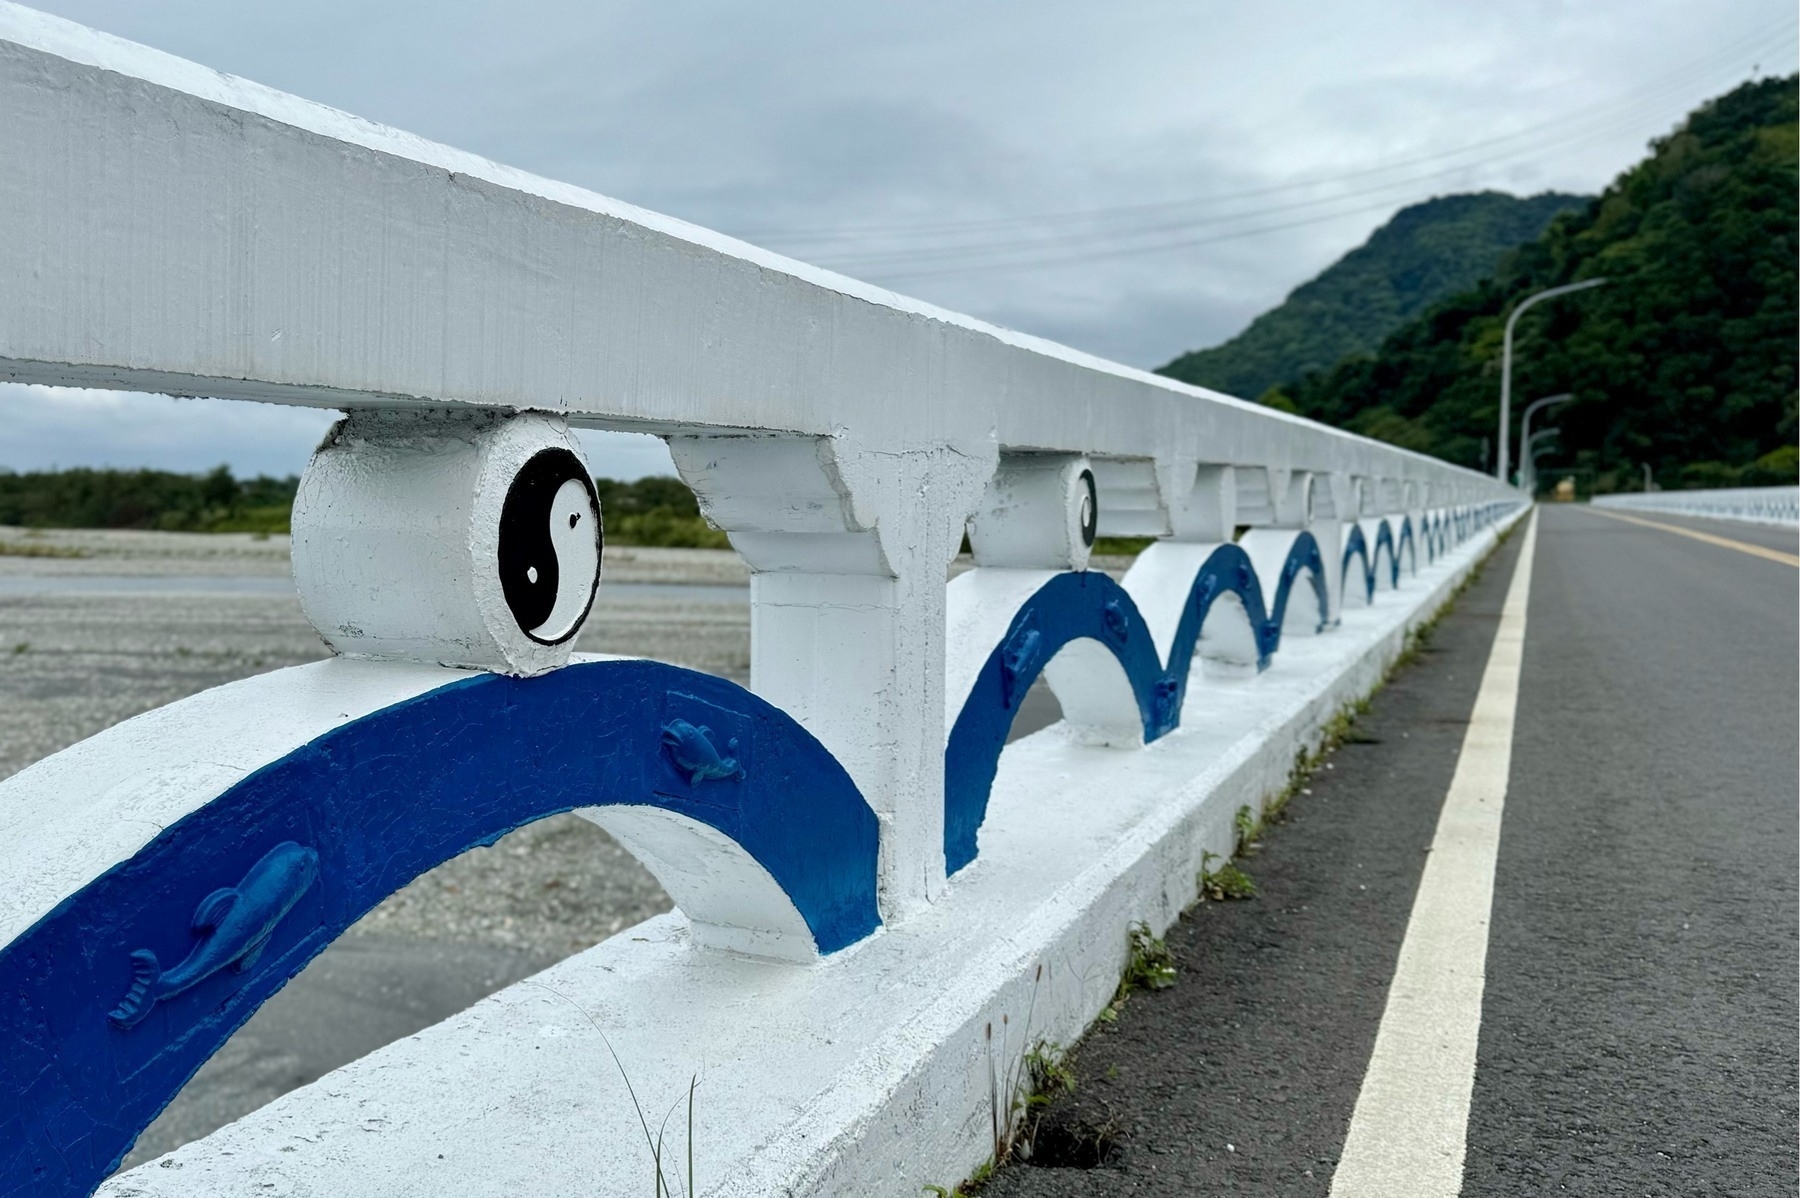 Looking across a white bridge, the lower part made up of blue arches, with embossed dolphins and the yin and yang symbol